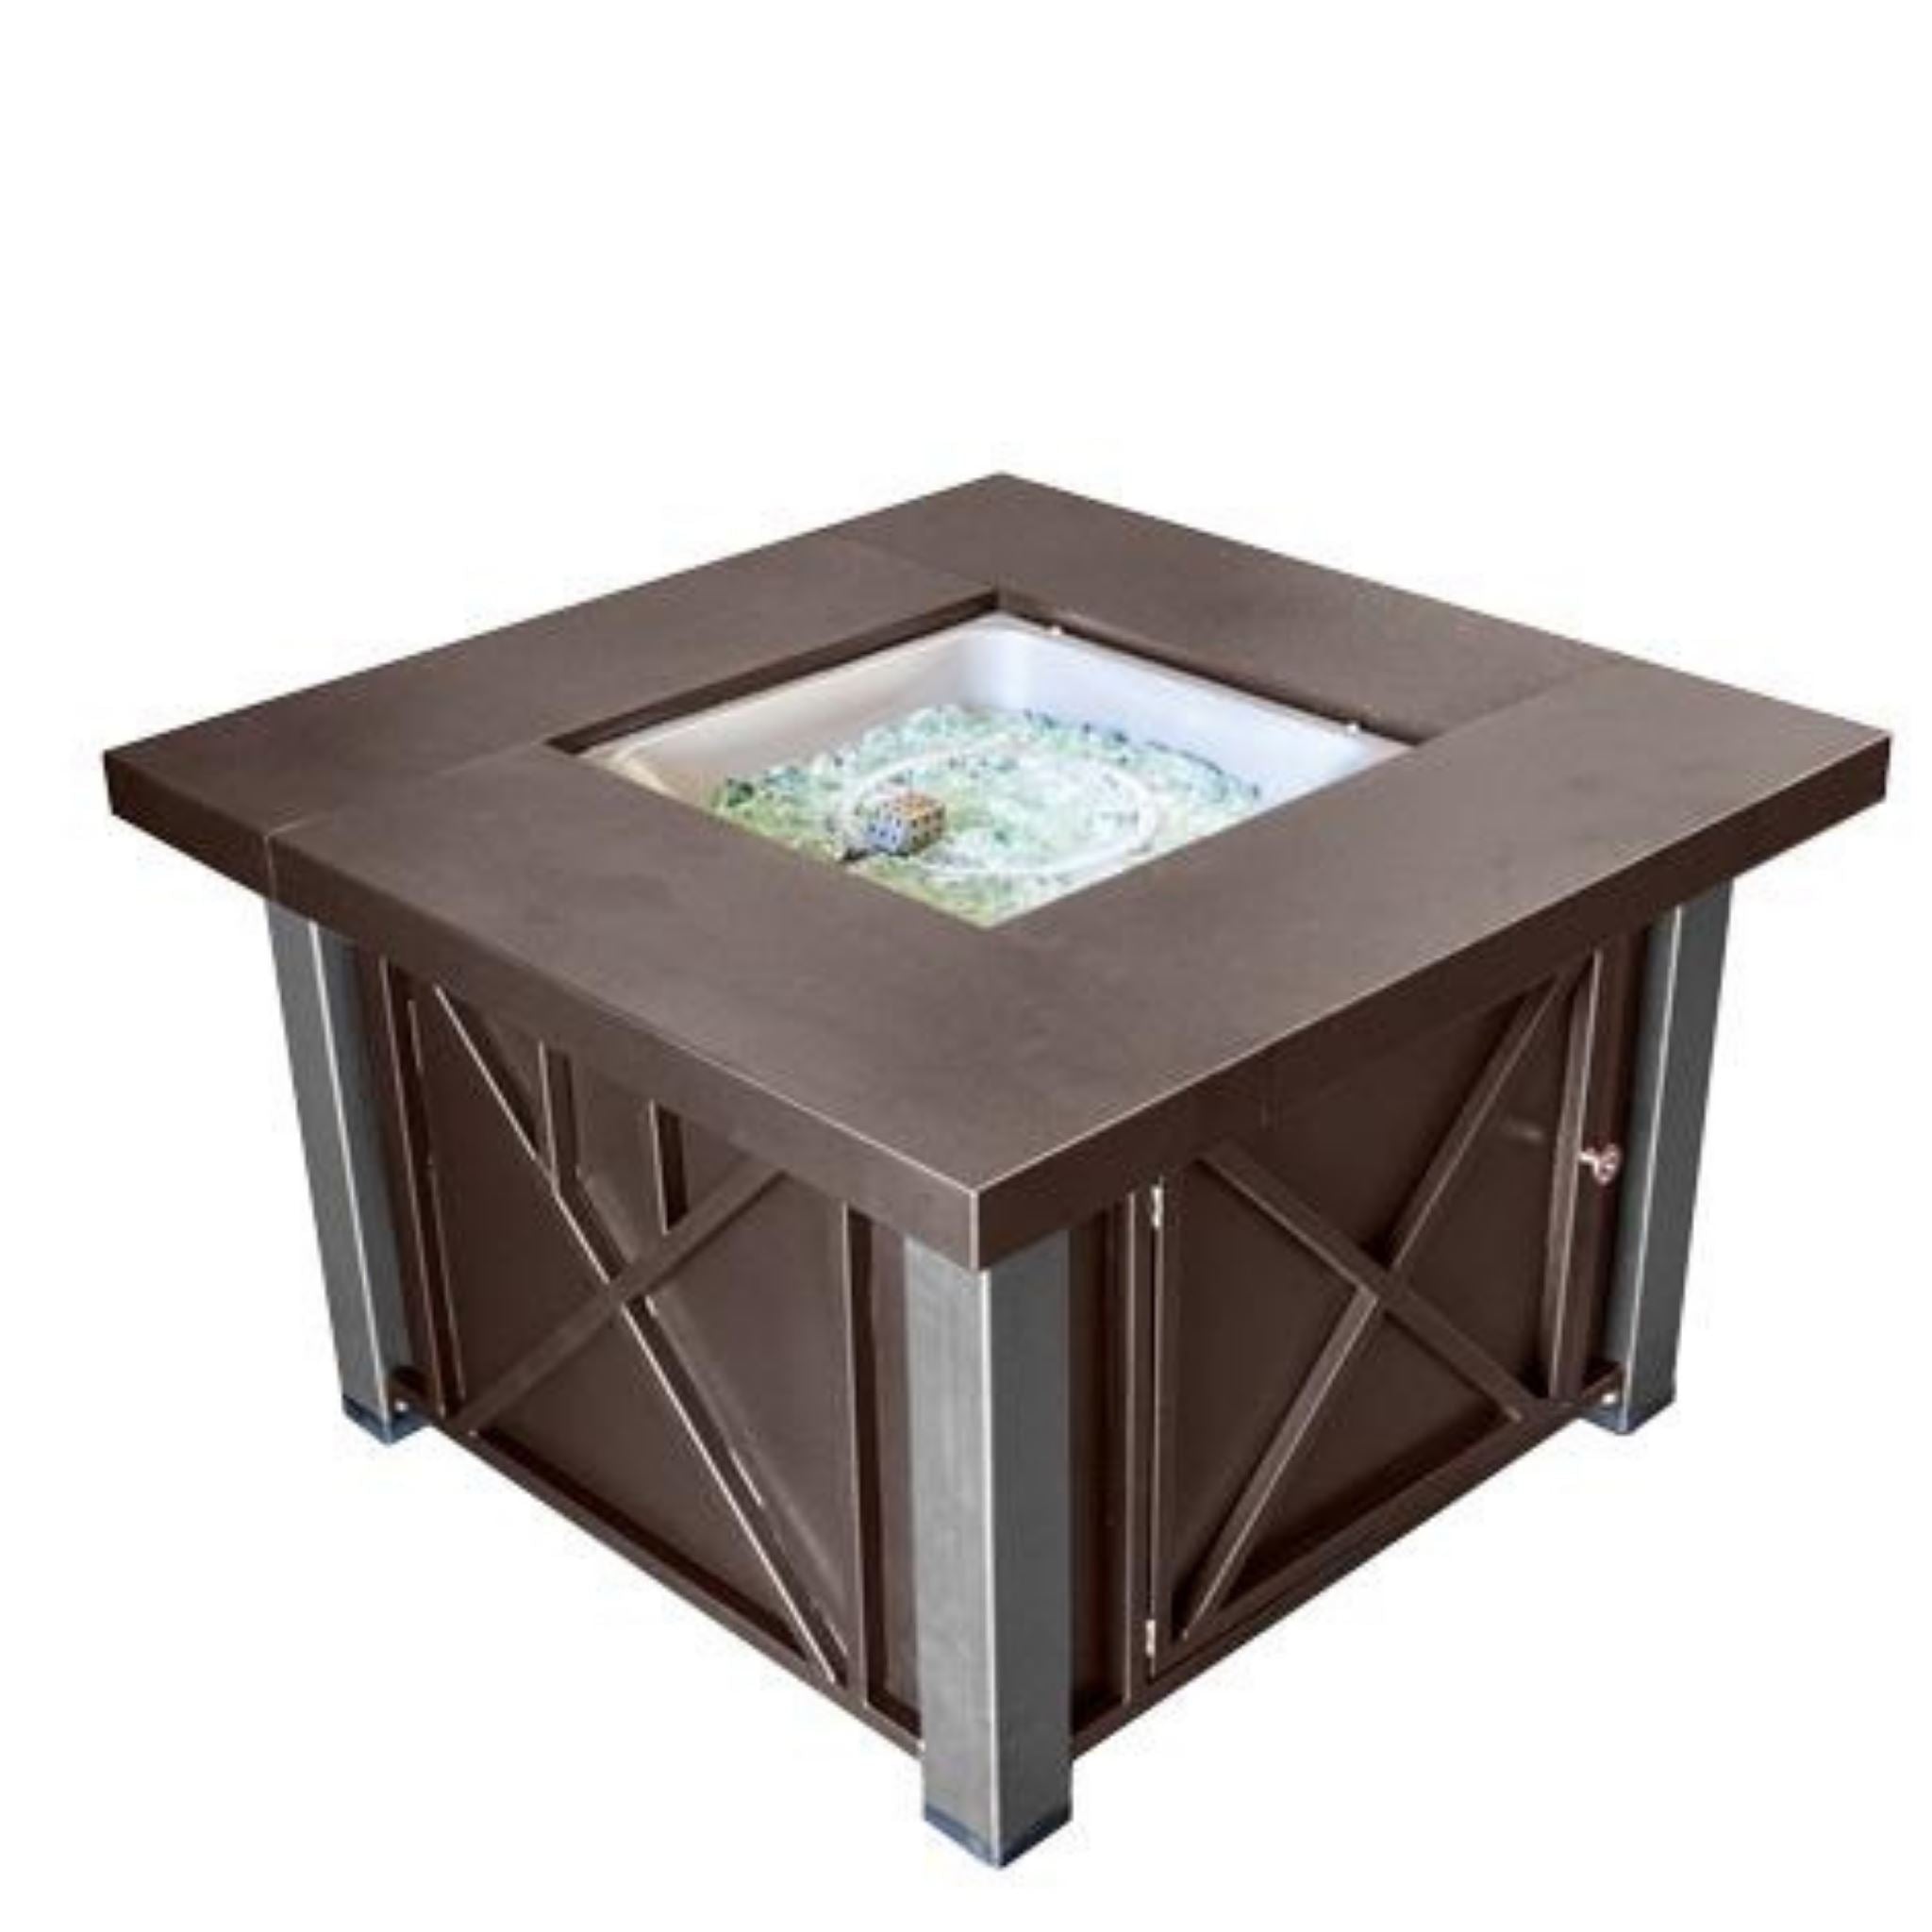 AZ Patio Heaters 38" Decorative Hammered Bronze Fire Pit Table with Stainless Steel Legs and Lid GSF-DGHSS Fire Pit AZ Patio Heaters - in white back ground